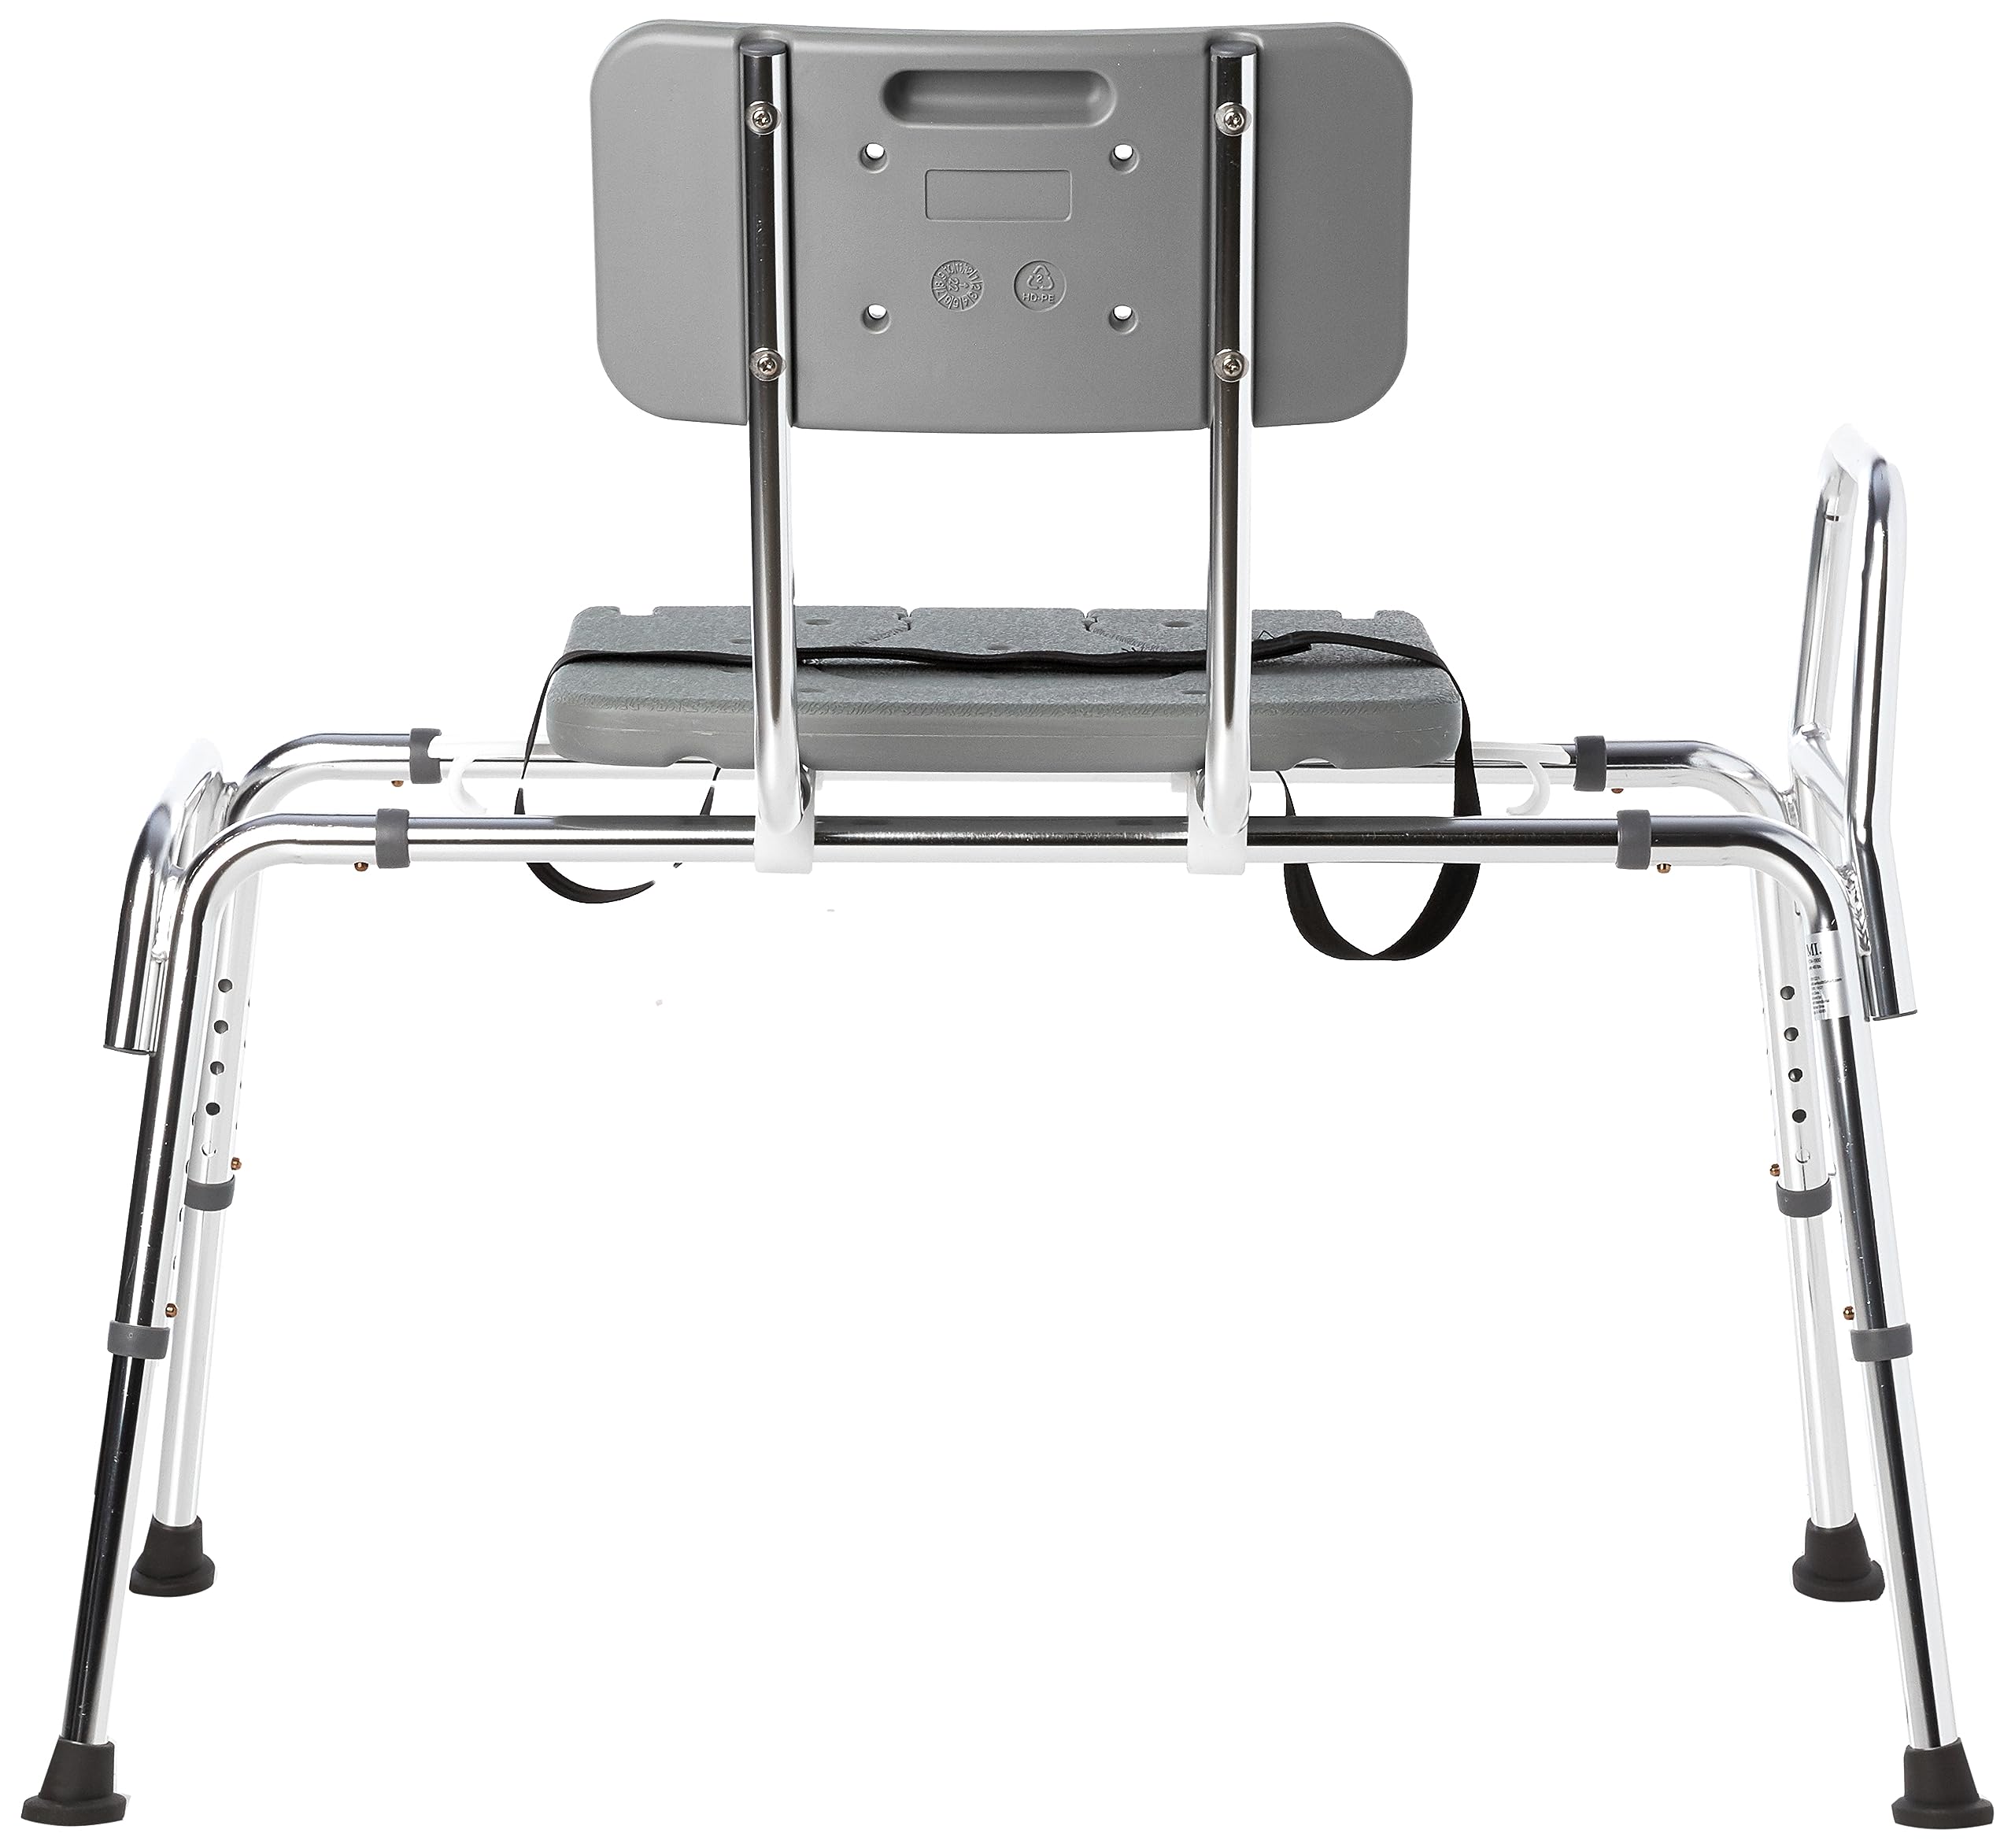 DMI Tub Transfer Bench and Shower Chair with Non Slip Aluminum Body, FSA Eligible, Adjustable Seat Height and Cut Out Access, Holds Weight up to 400 Lbs, Bath and Shower Safety, Transfer Bench